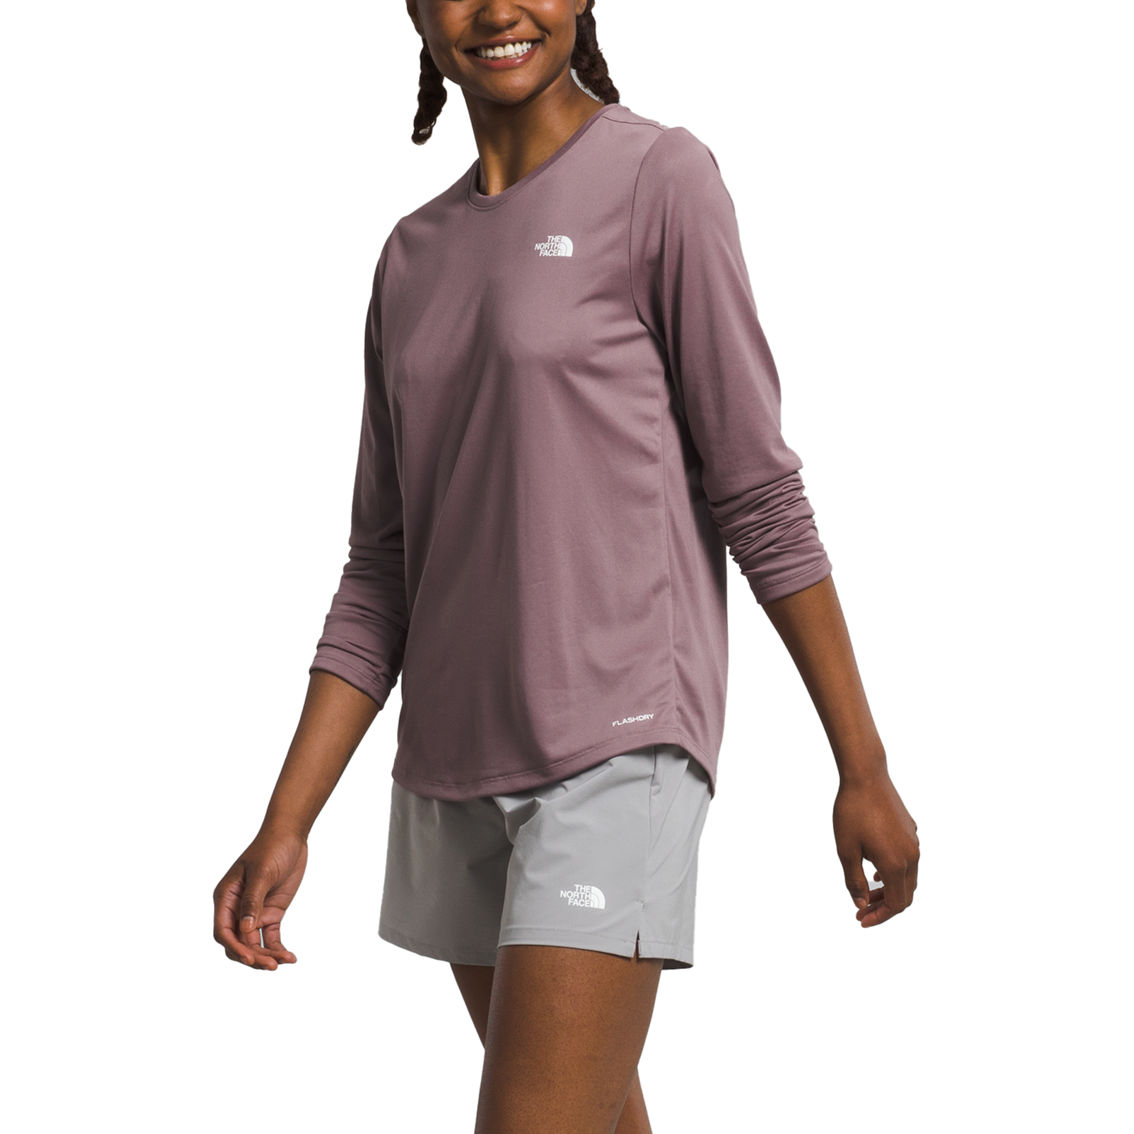 The North Face Elevation Shirt - Image 3 of 7